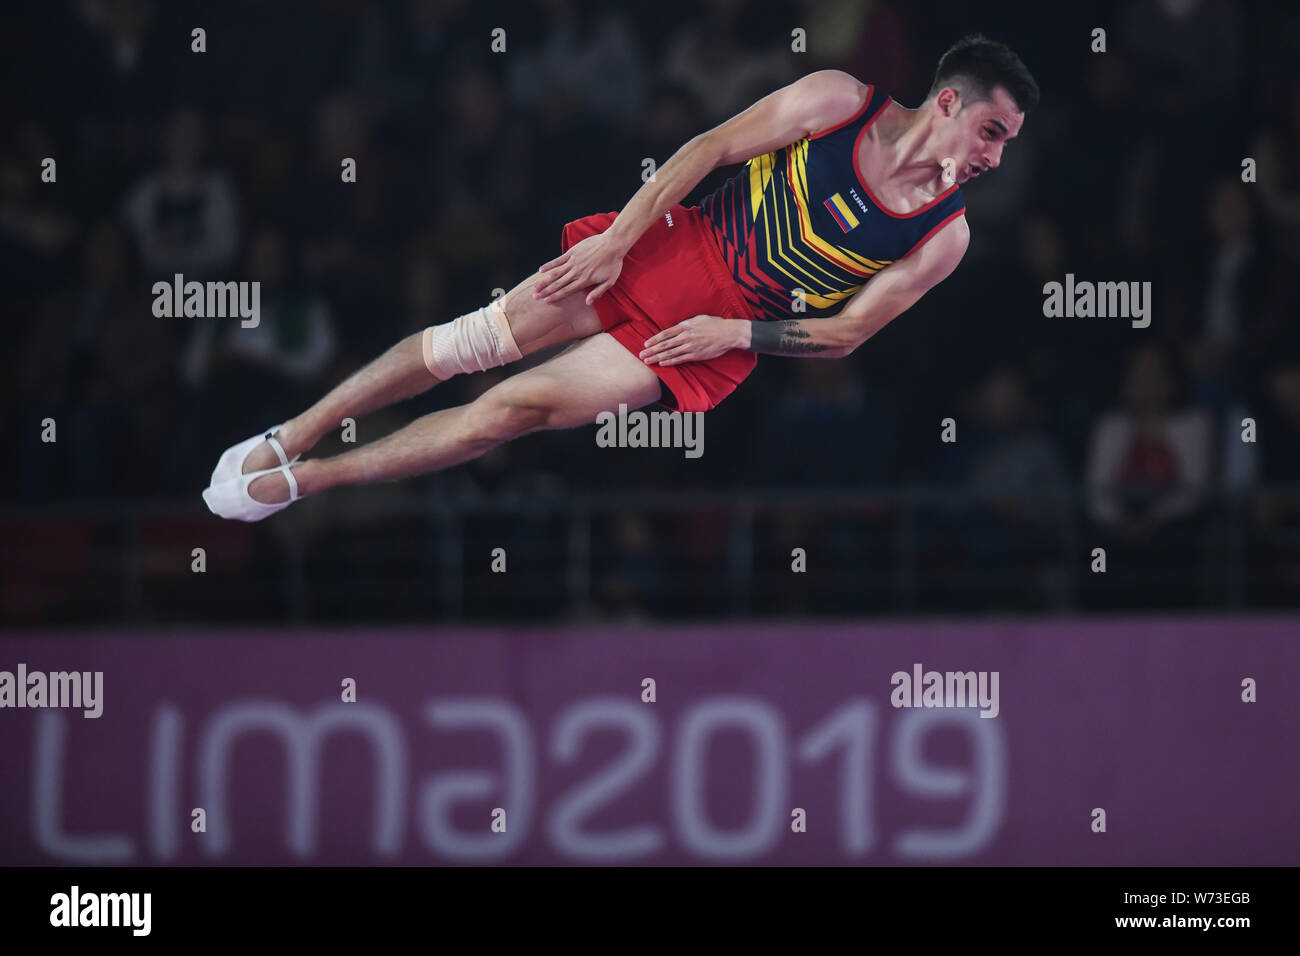 Lima, Peru. 4th Aug, 2019. ANGEL HERNANDEZ from Colombia flips during the competition held in the Polideportivo Villa El Salvador in Lima, Peru. Credit: Amy Sanderson/ZUMA Wire/Alamy Live News Stock Photo